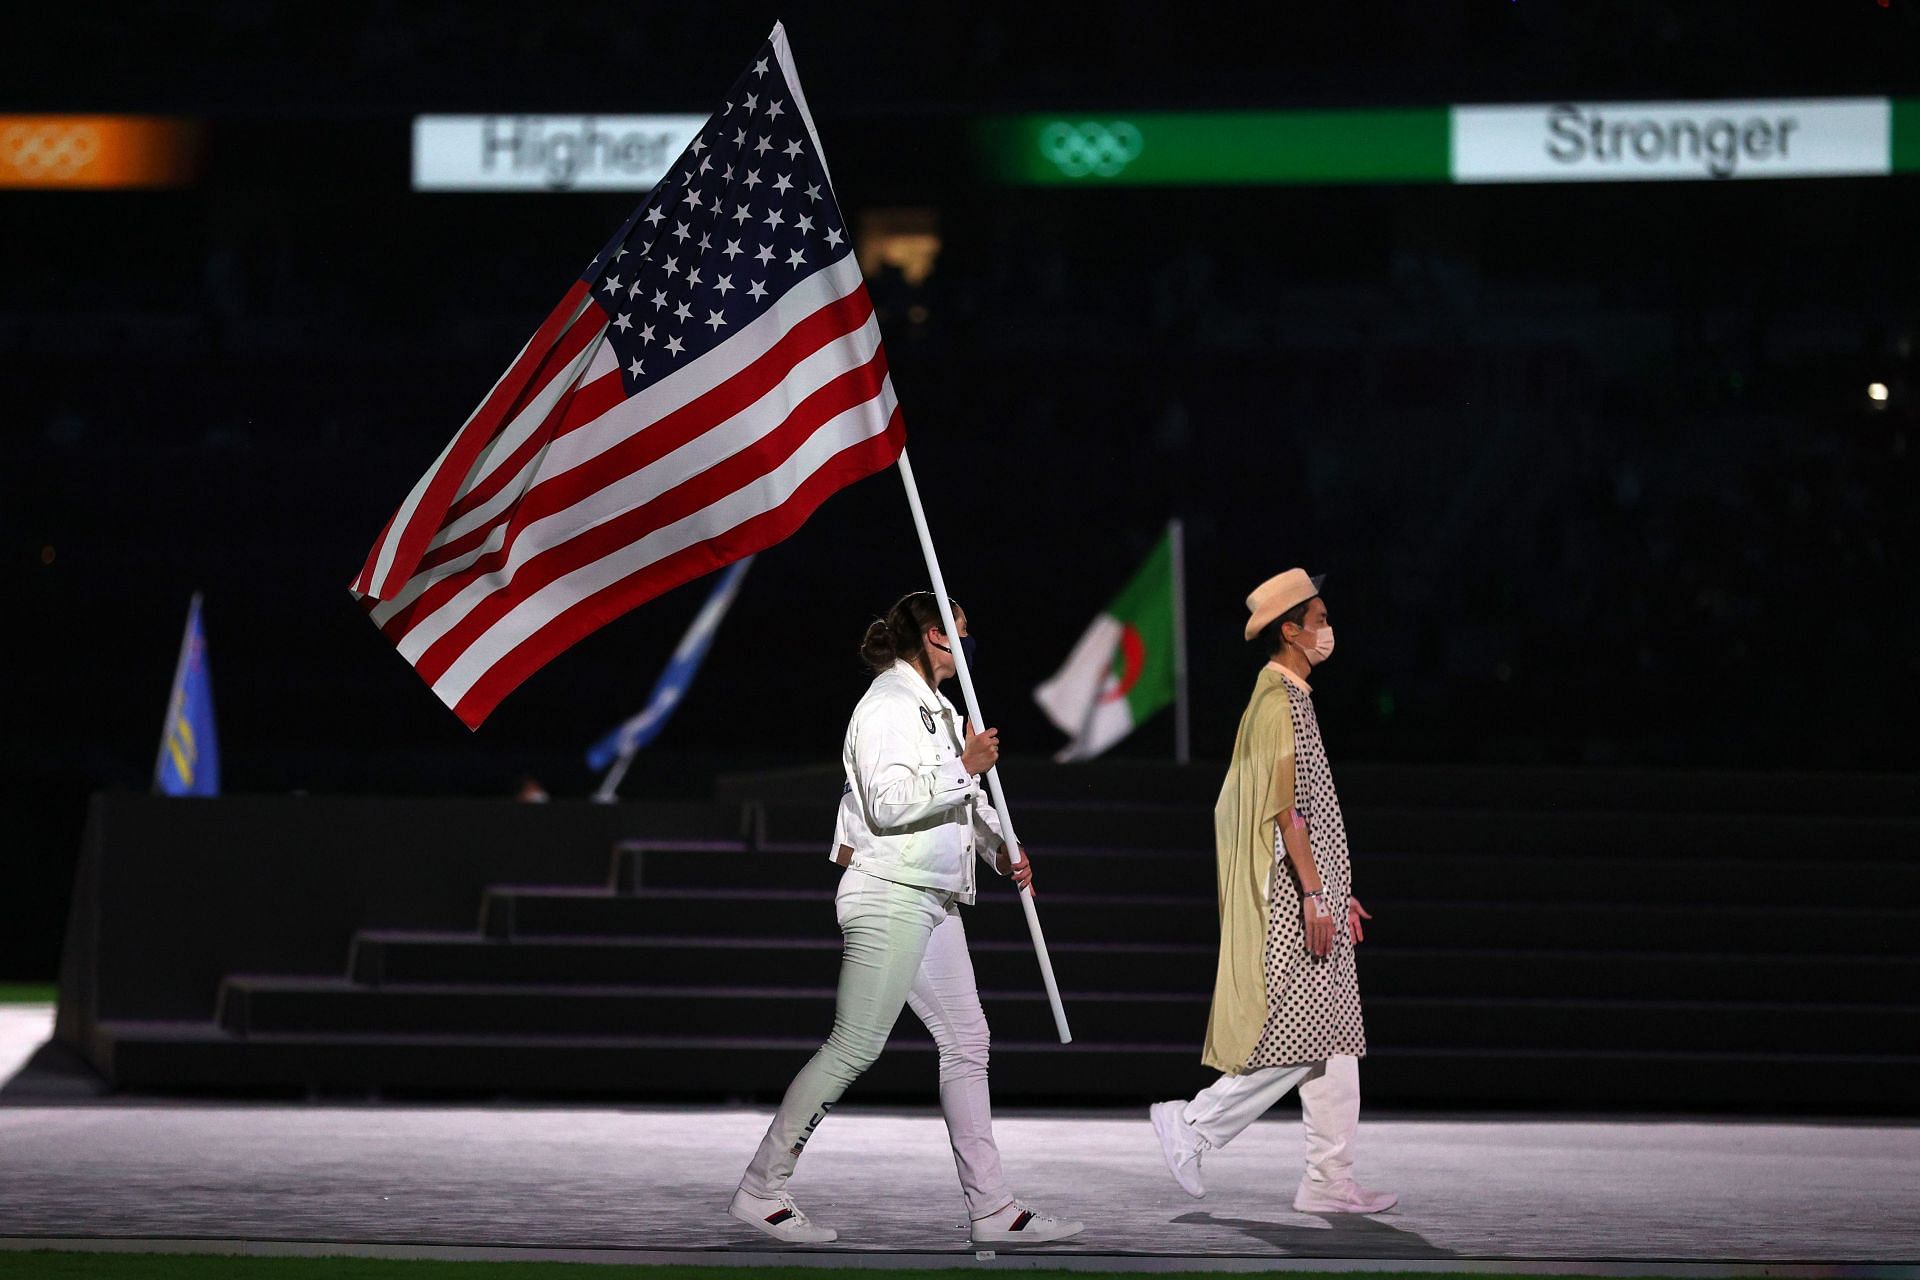 Flagbearer Kara Winger of Team United States during the Closing Ceremony of the Tokyo 2020 Olympic Games